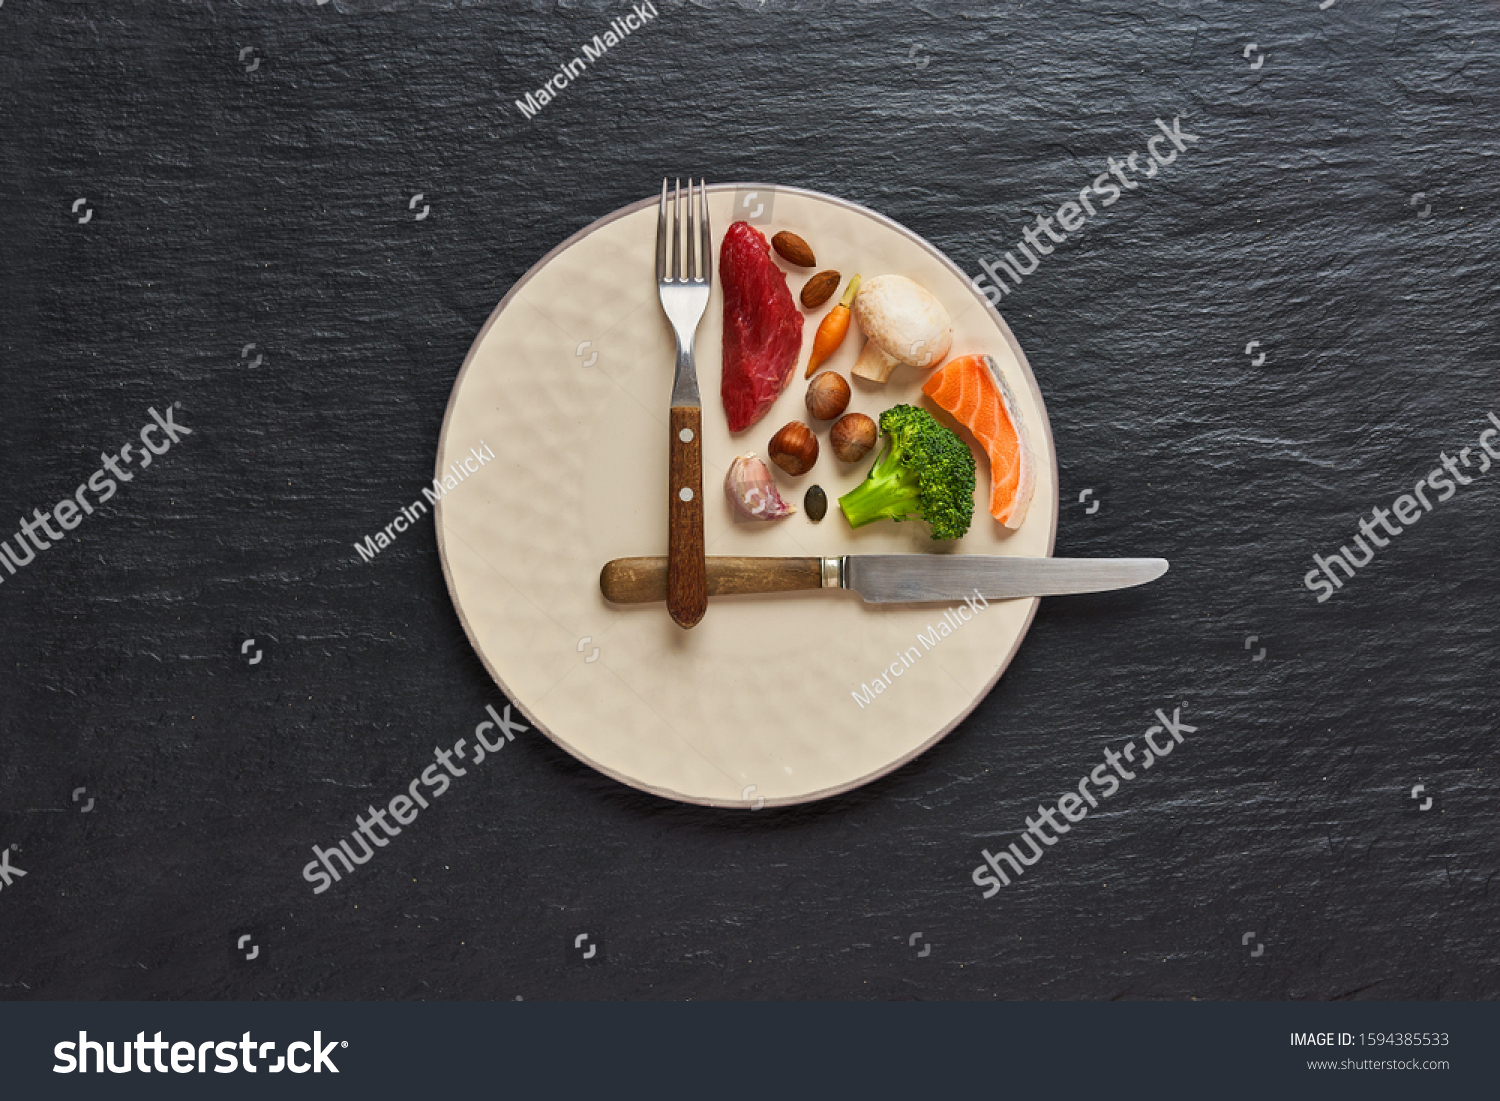  20:4 fasting diet concept. One third plate with healthy food and two third plate is empty. Beef, salmon, egg, broccoli, tomato, nuts, carrots, mushrooms. Dark background. Top view. #1594385533